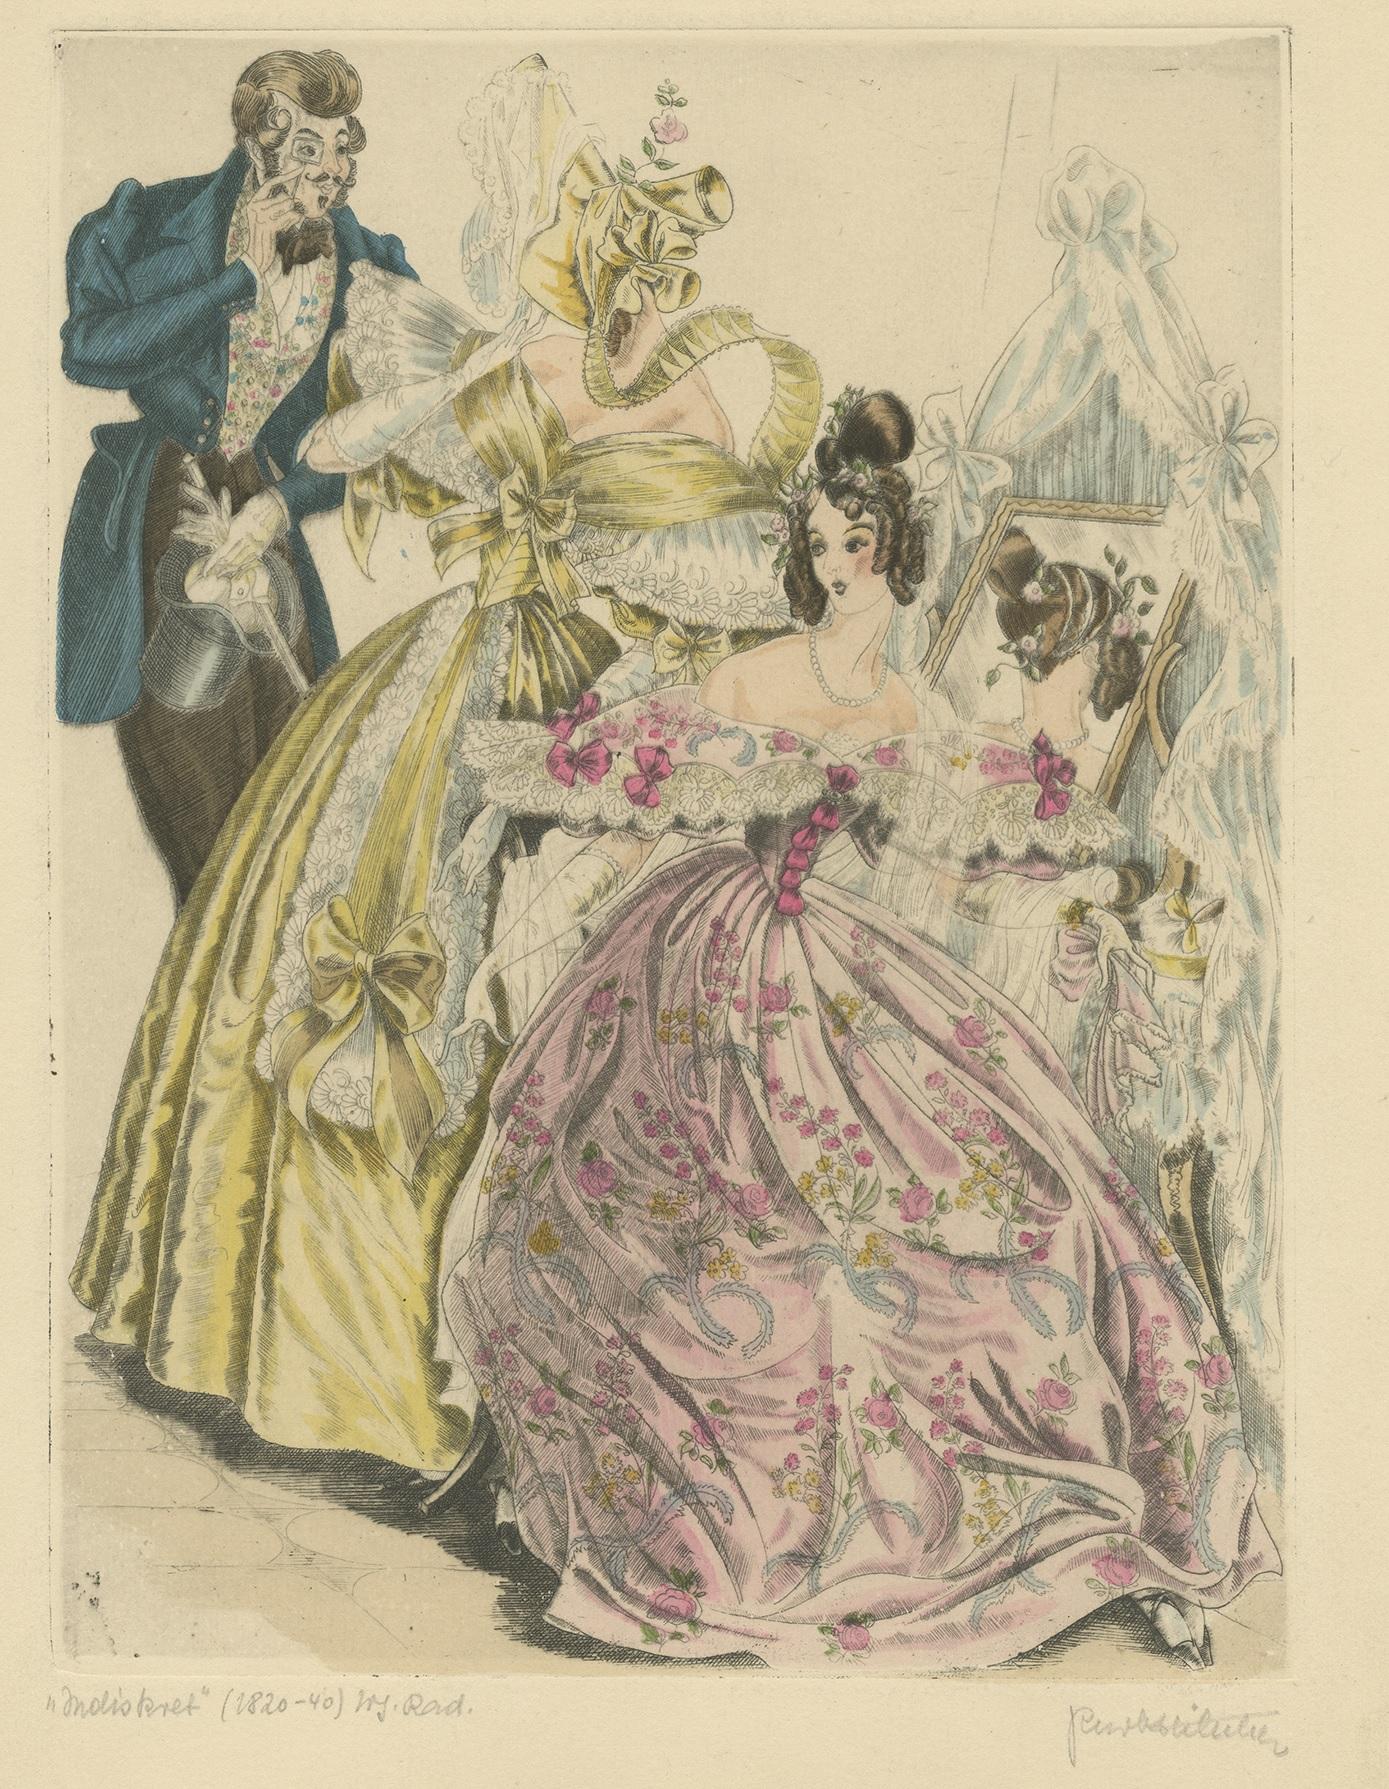 Antique print titled 'Indiskret' (1820-1840). Signed print of Hilscher's unique take on romance. Kurt Hilscher (1904–1980) was a German commercial illustrator. Hilscher studied in 1924–1926 at the Dresden Academy of Fine Arts under Max Frey and in